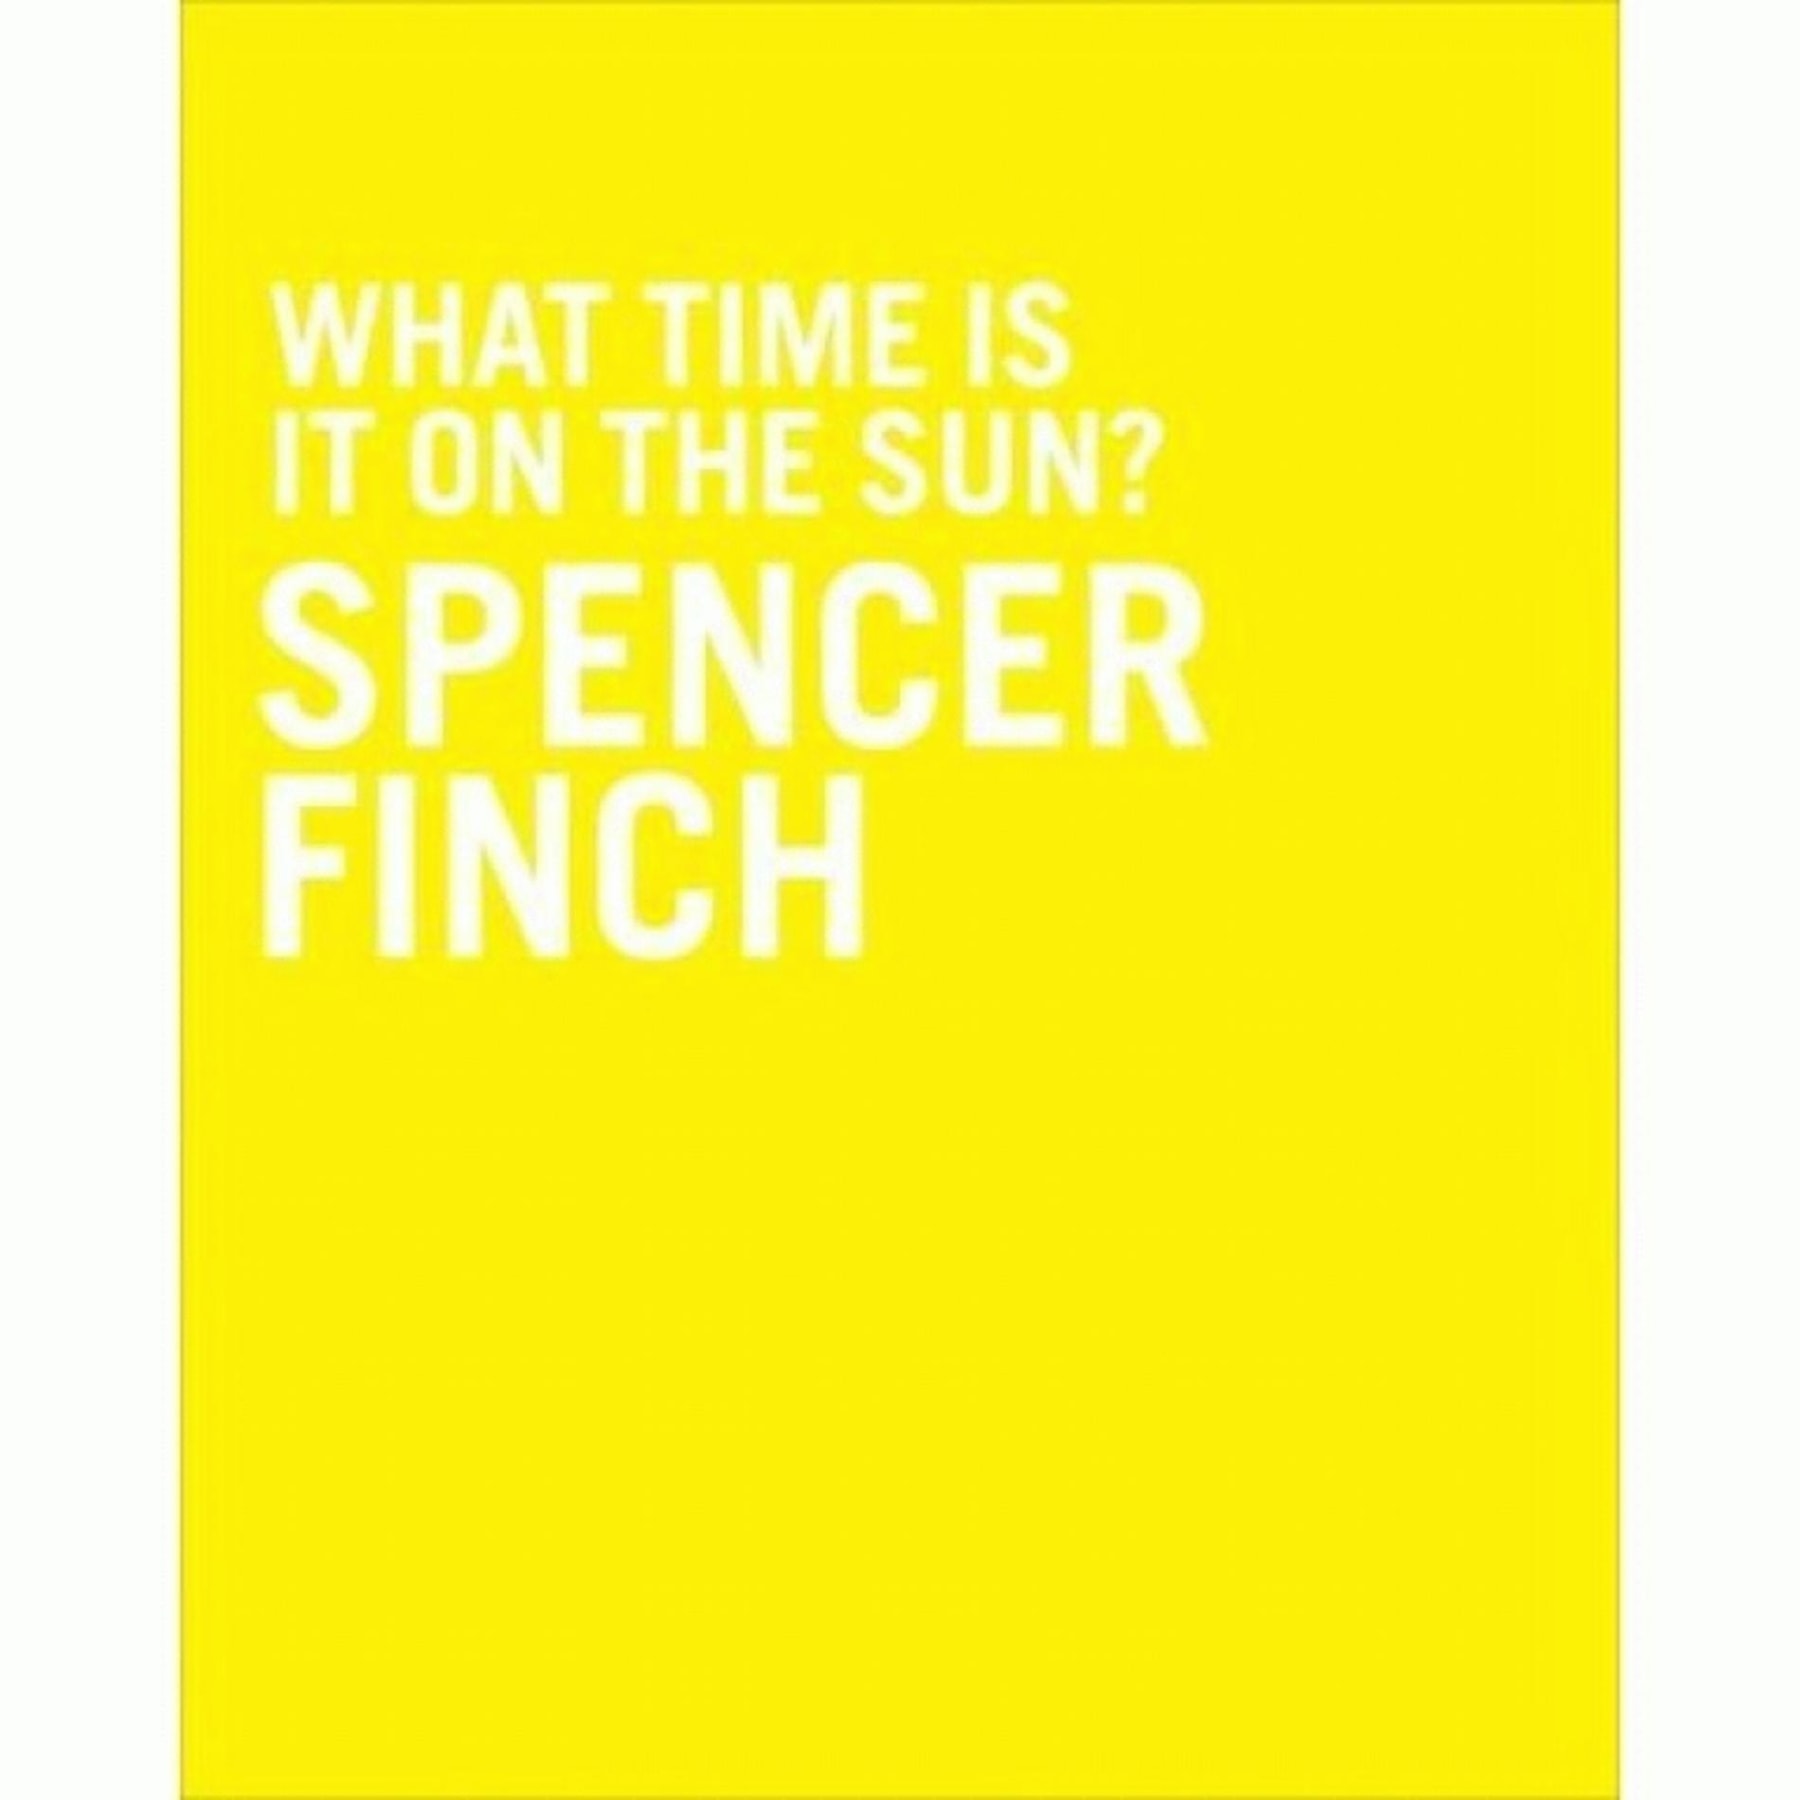 Spencer Finch: What Time is it on the Sun?